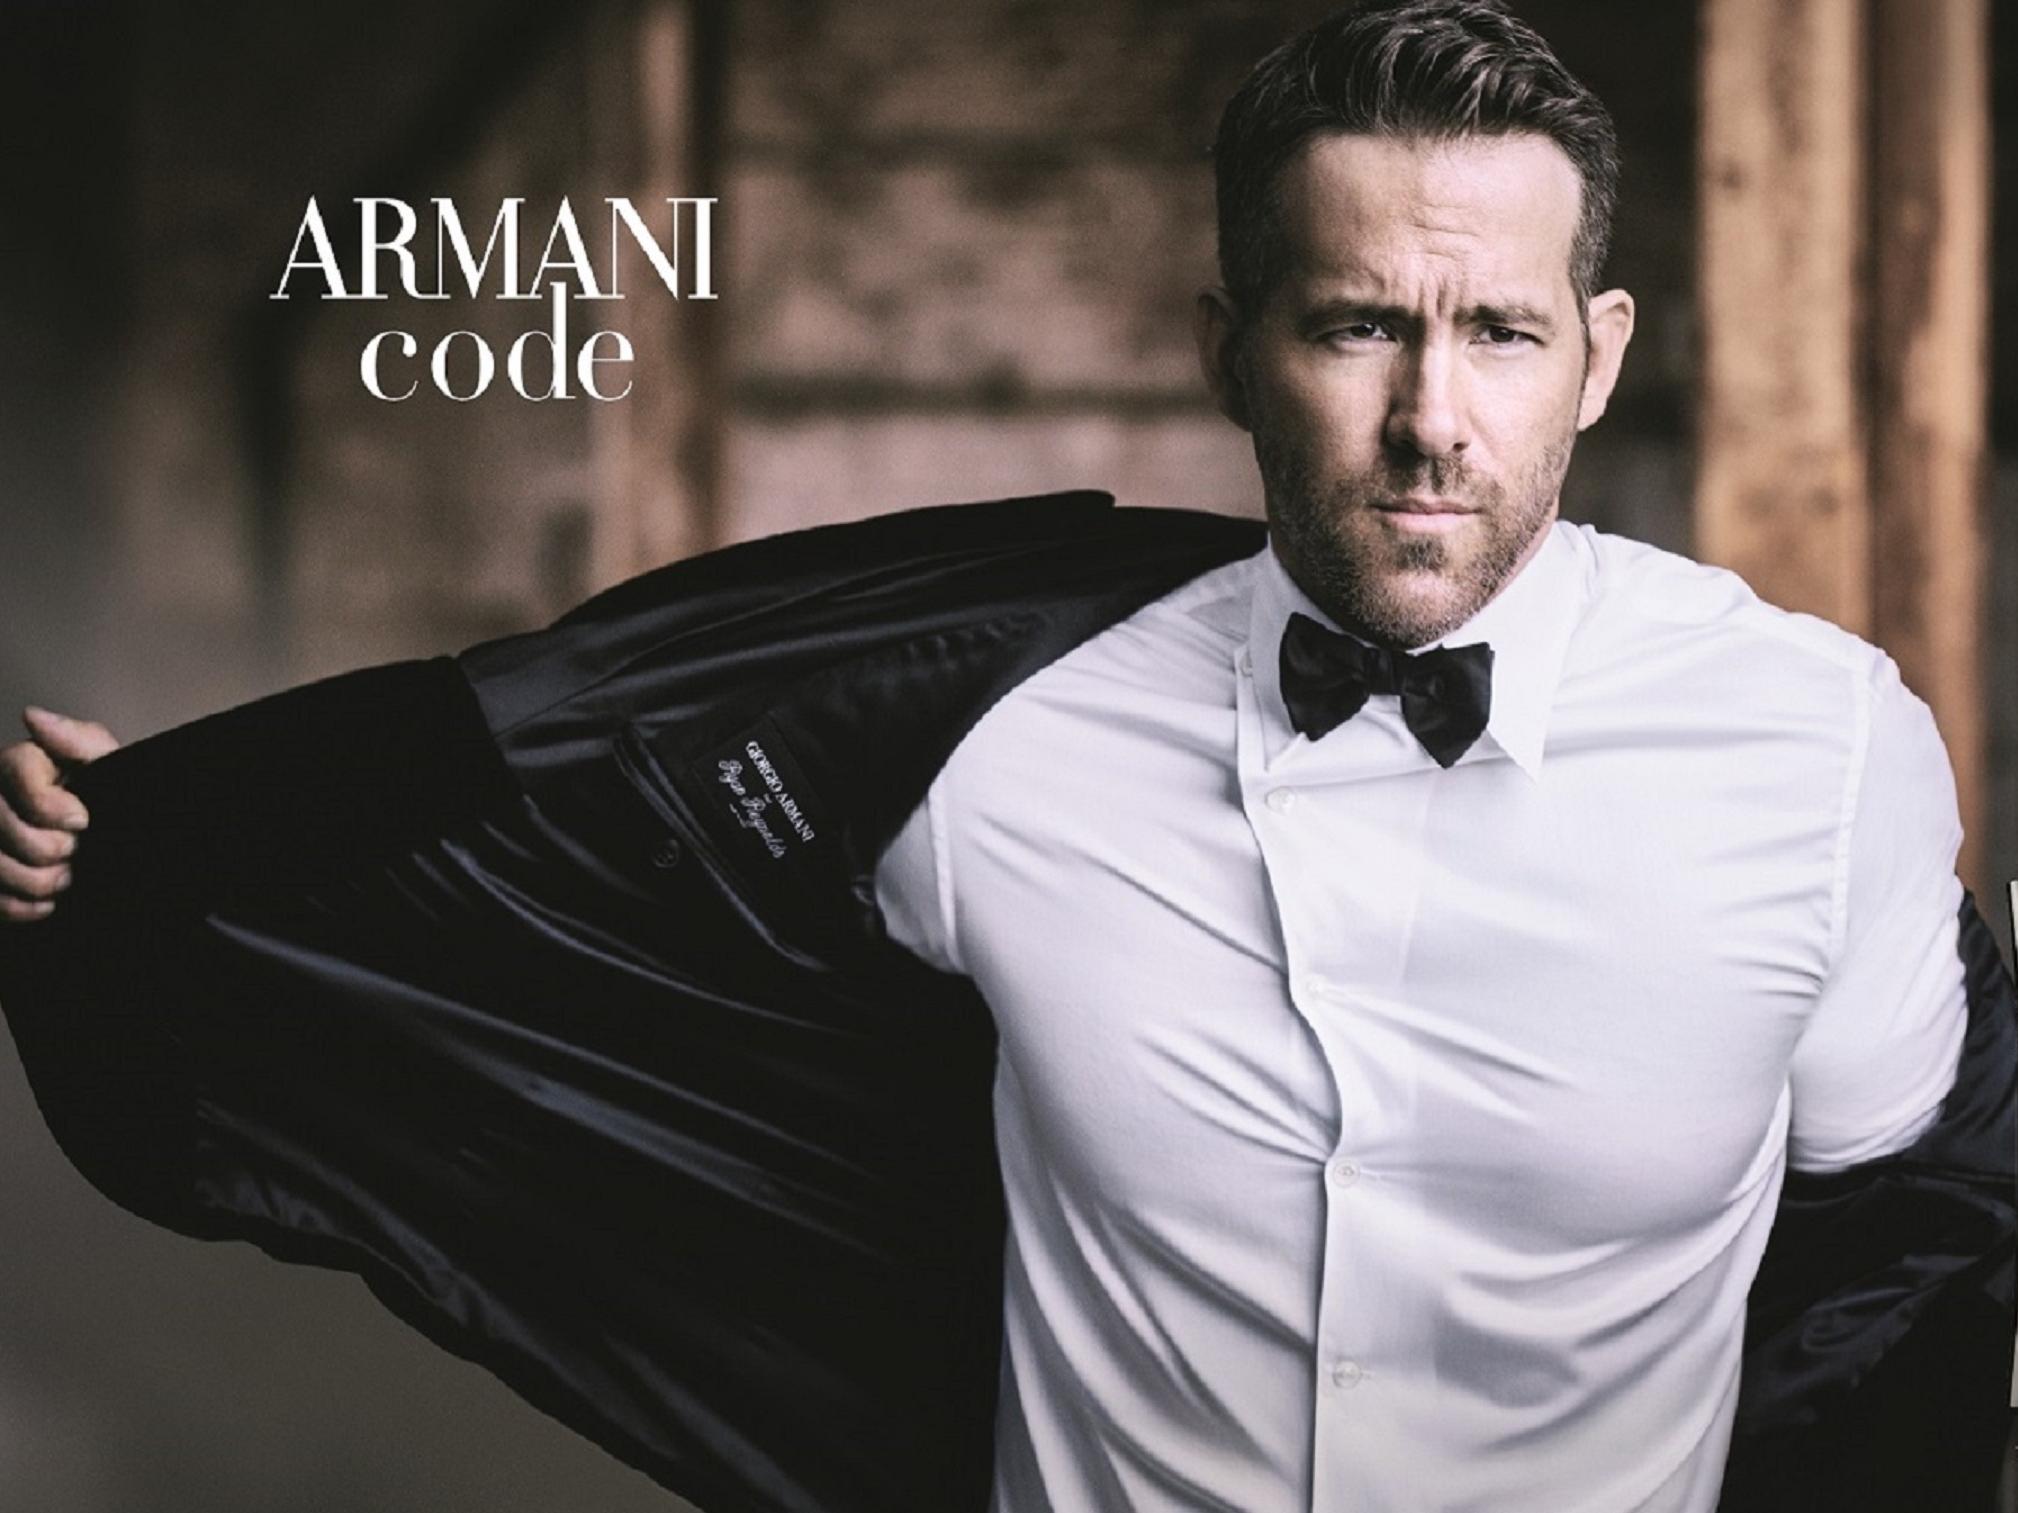 RYAN REYNOLDS, THE NEW FACE OF ARMANI CODE FRAGRANCE